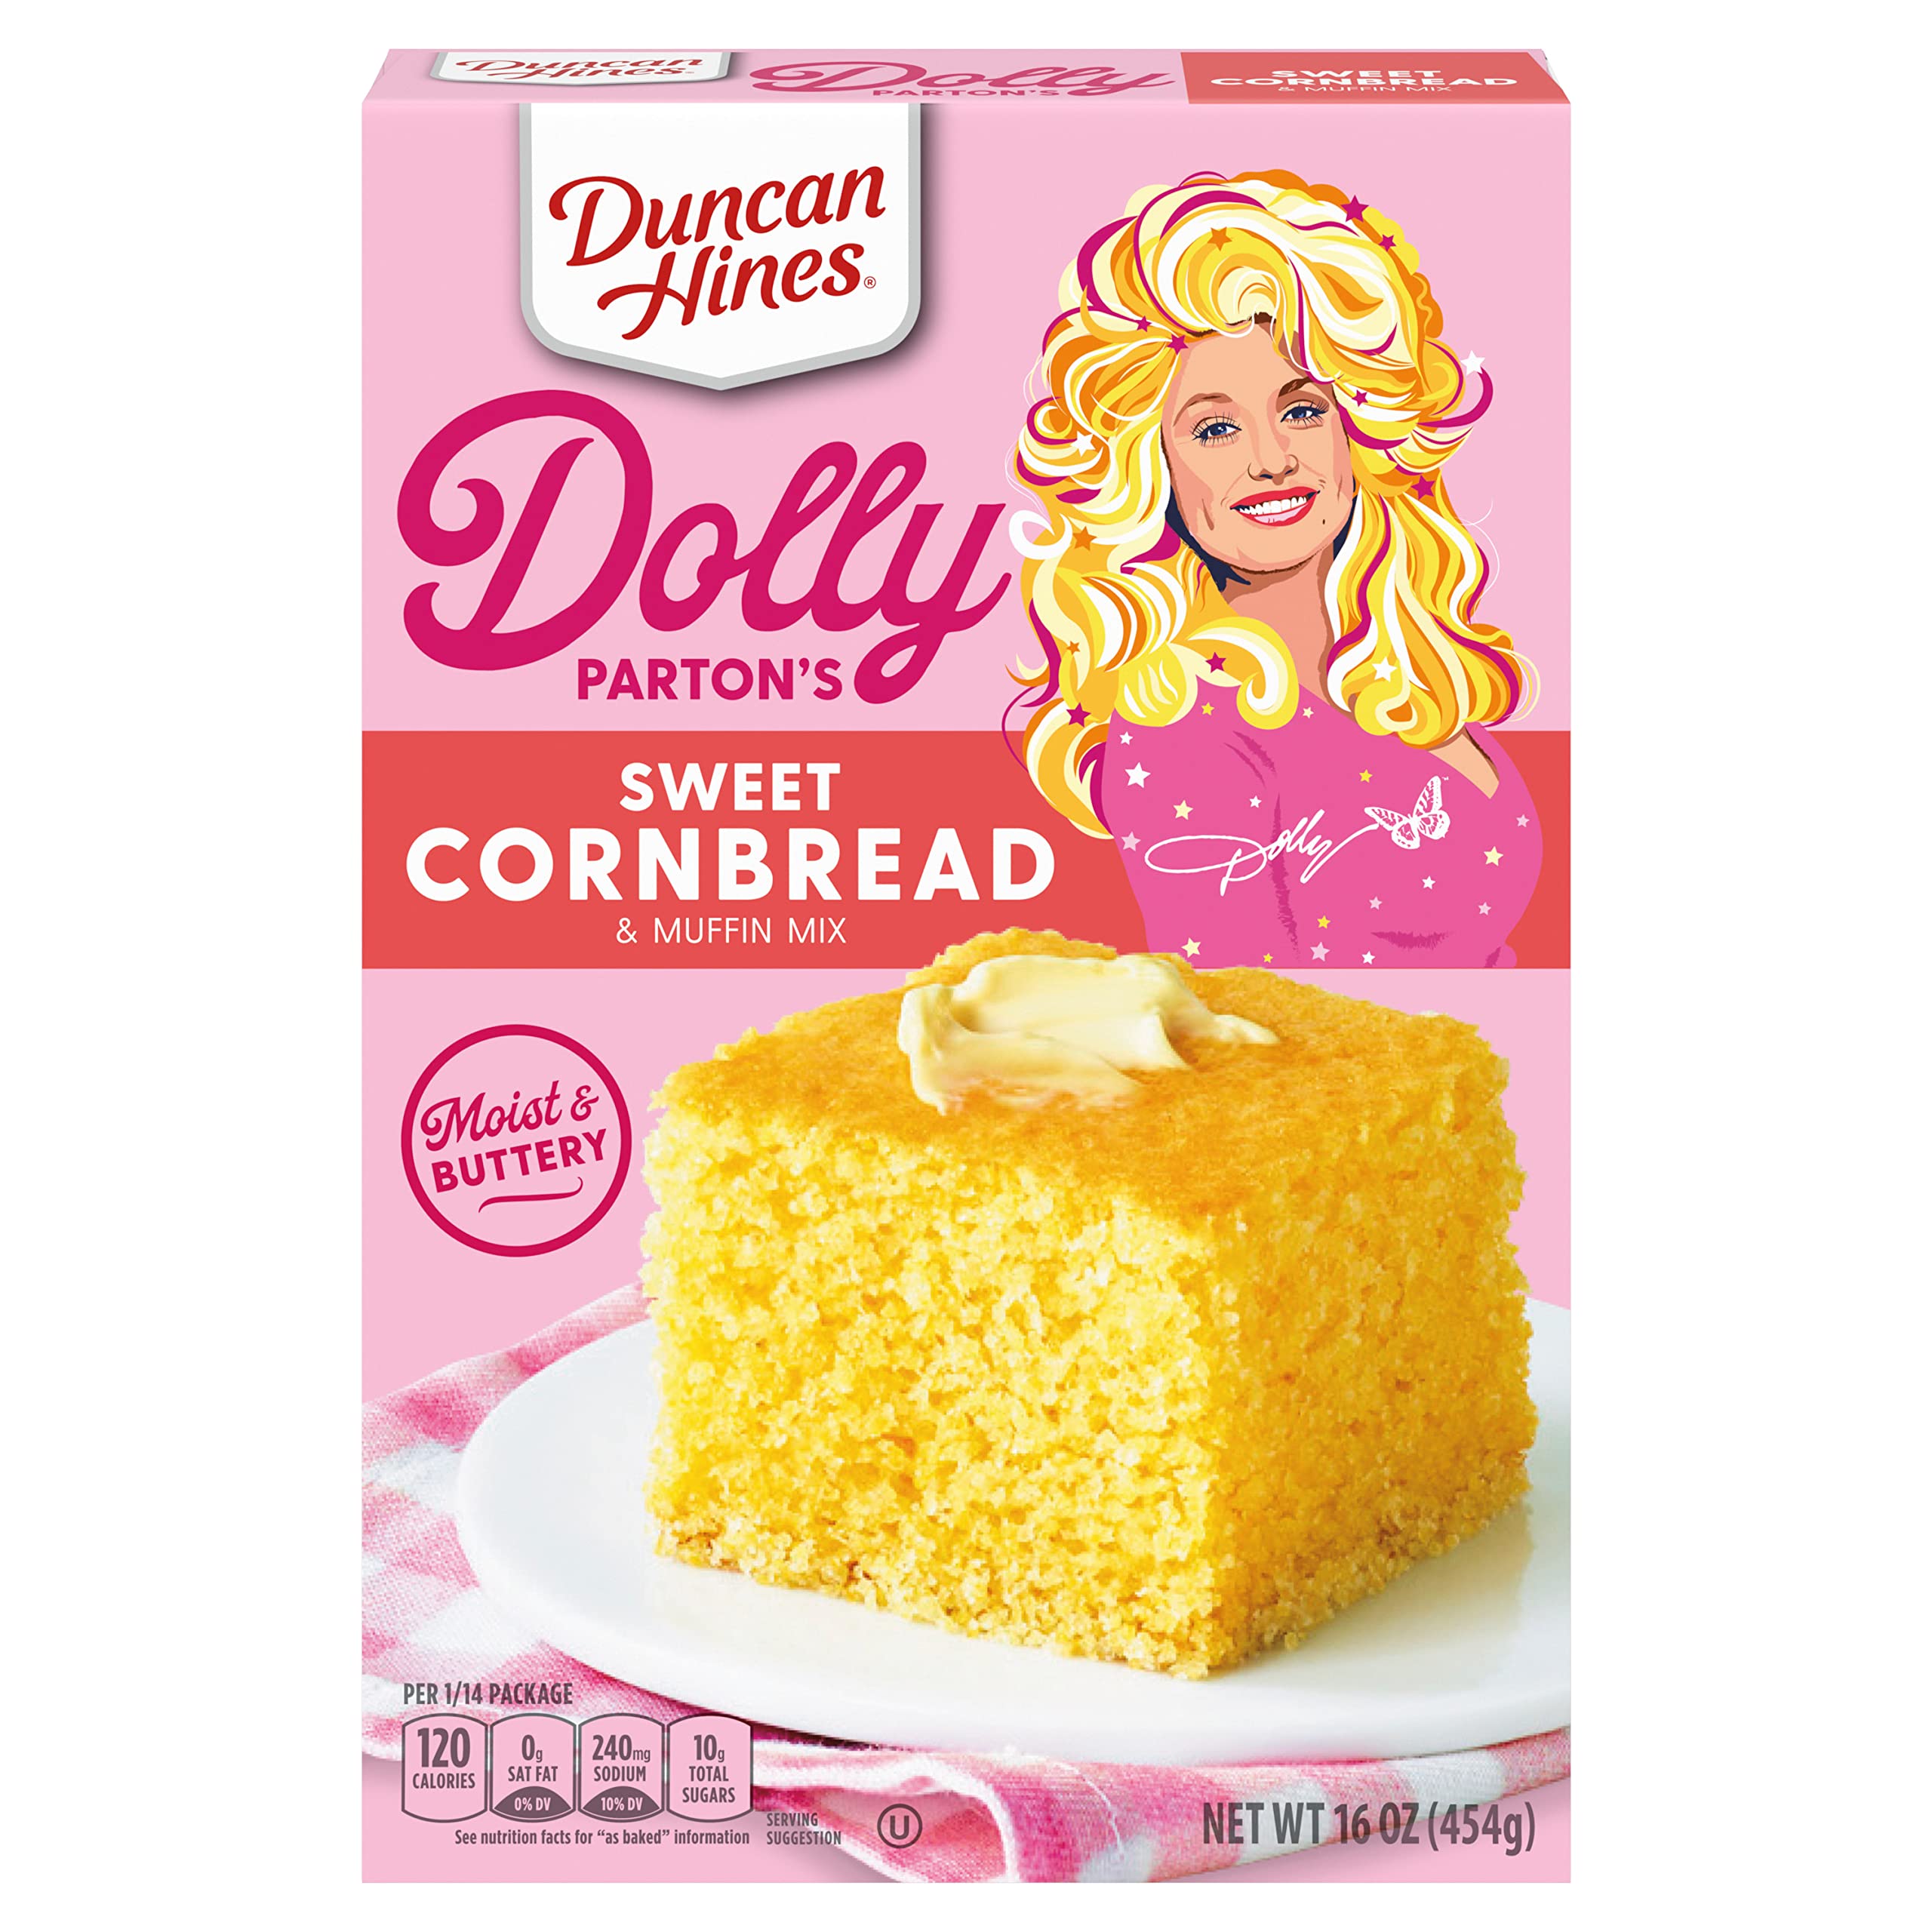 Duncan Hines - Dolly Parton - Southern Style Cake Mix - Cornbread - 454g